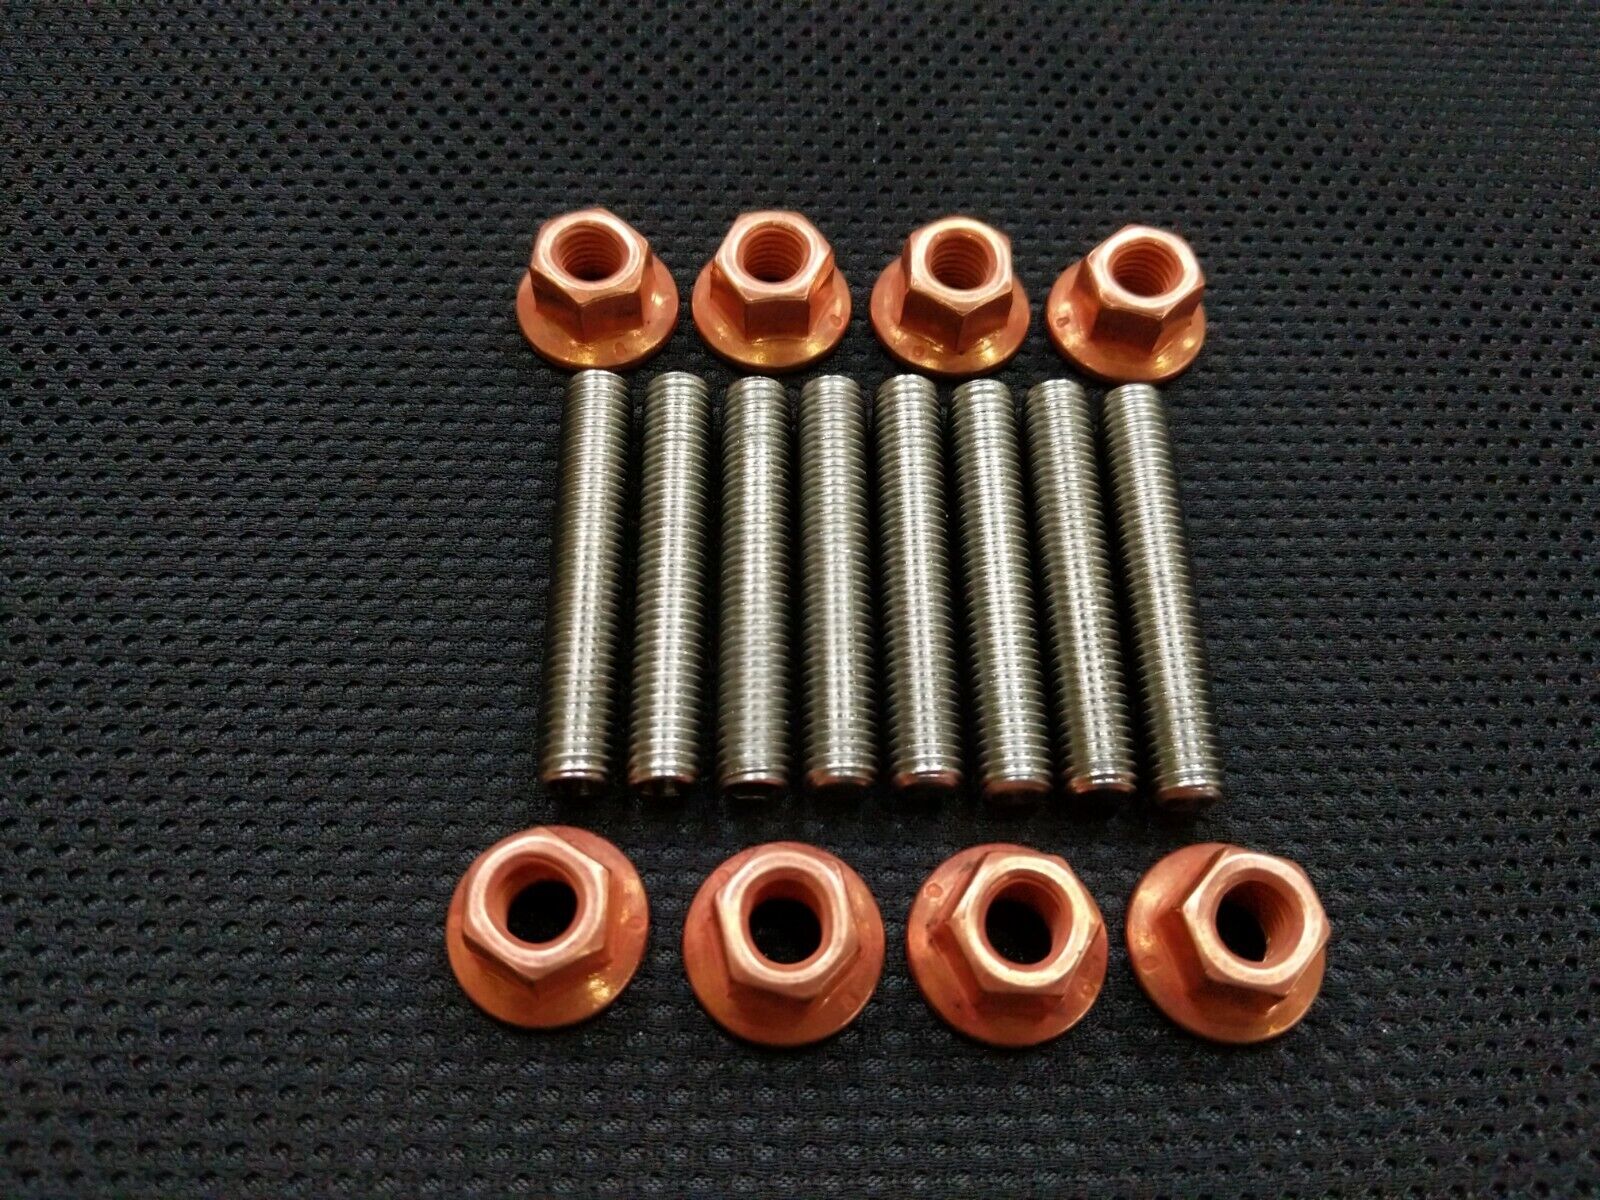 M7 Stainless Steel Exhaust Studs and Copper Flange nuts M7x1 M7x1p M7x1 pitch 8